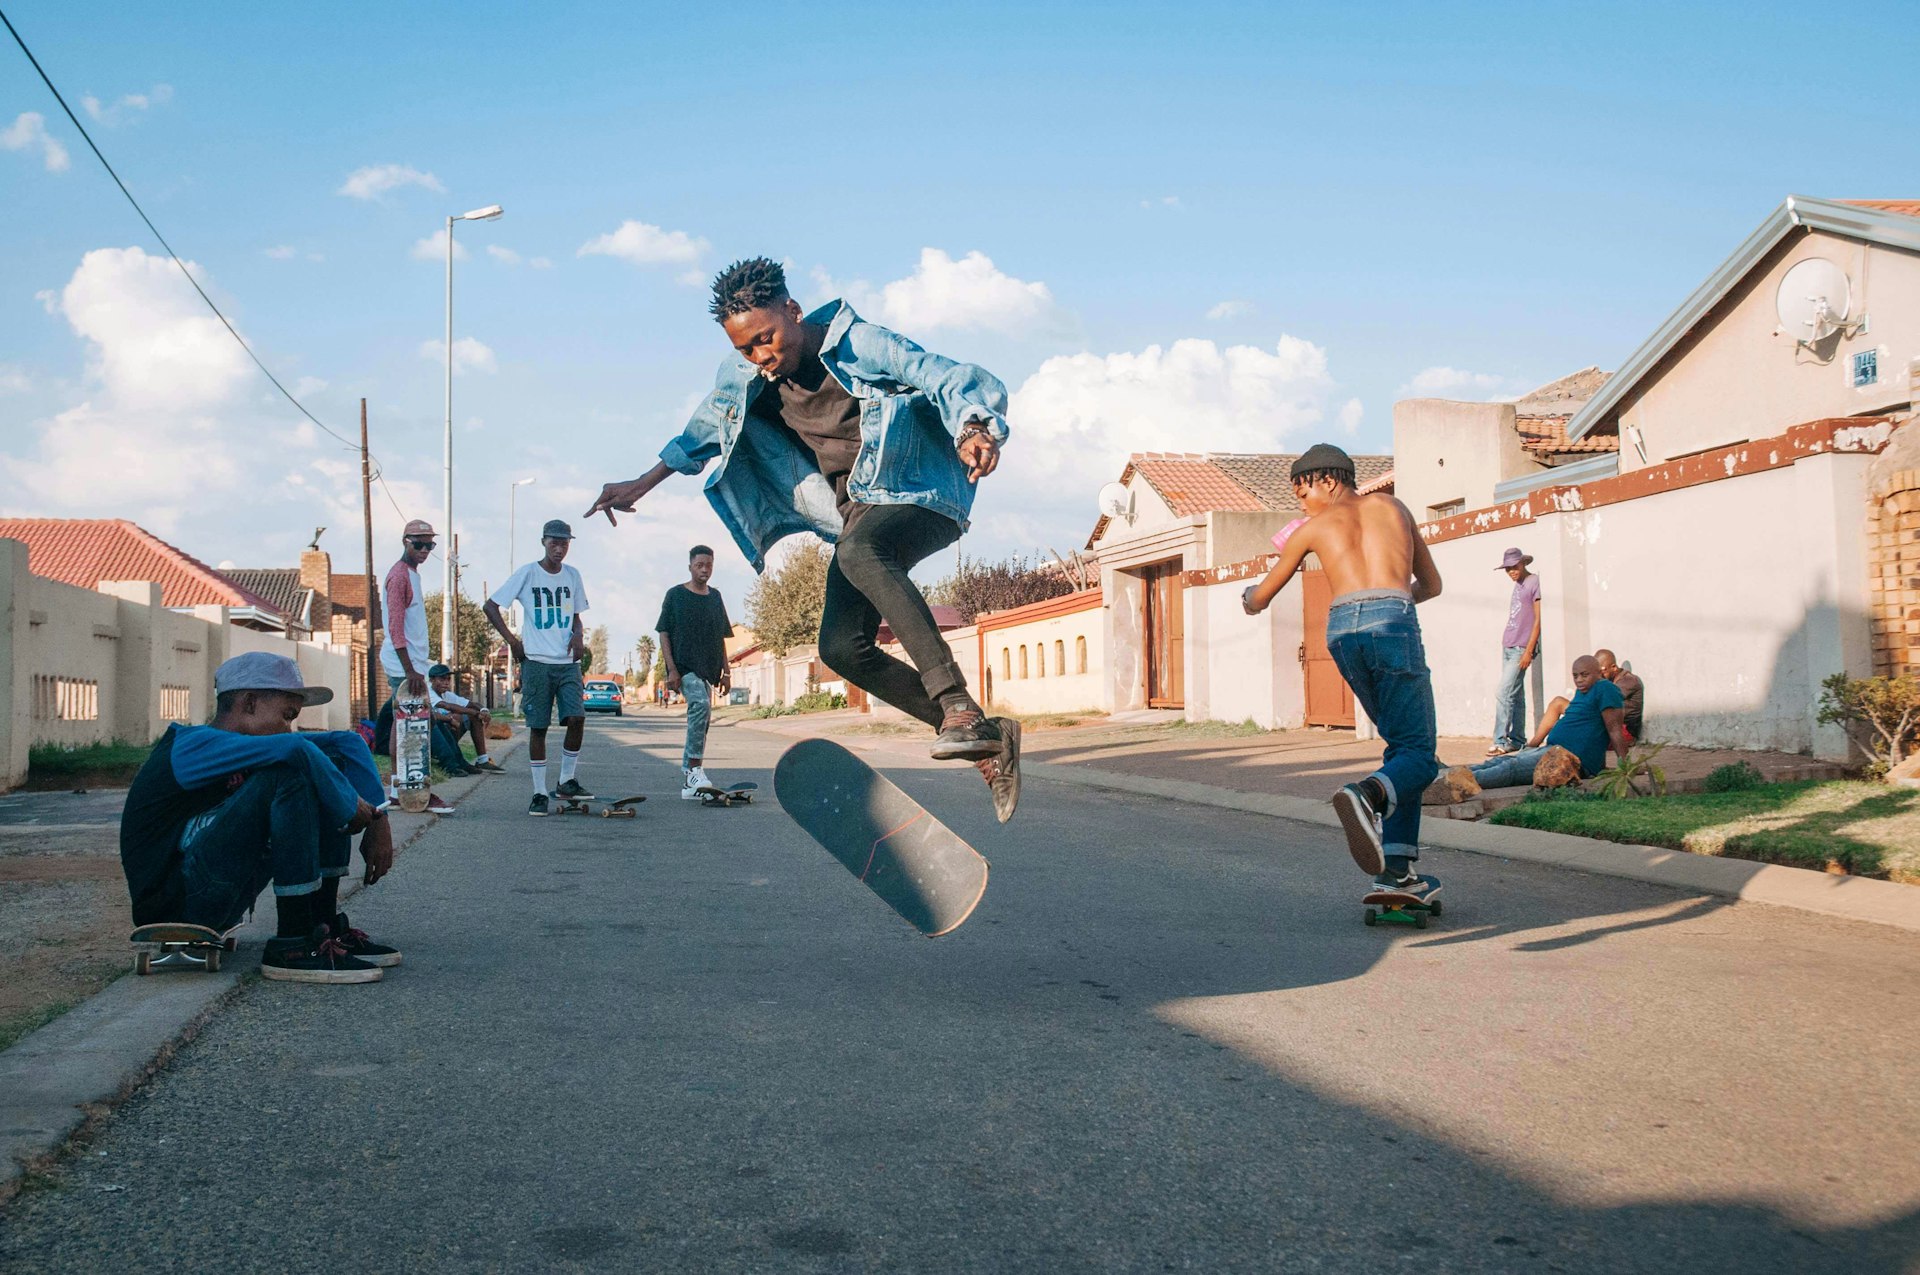 The South African skate punks sparking a cultural revolution